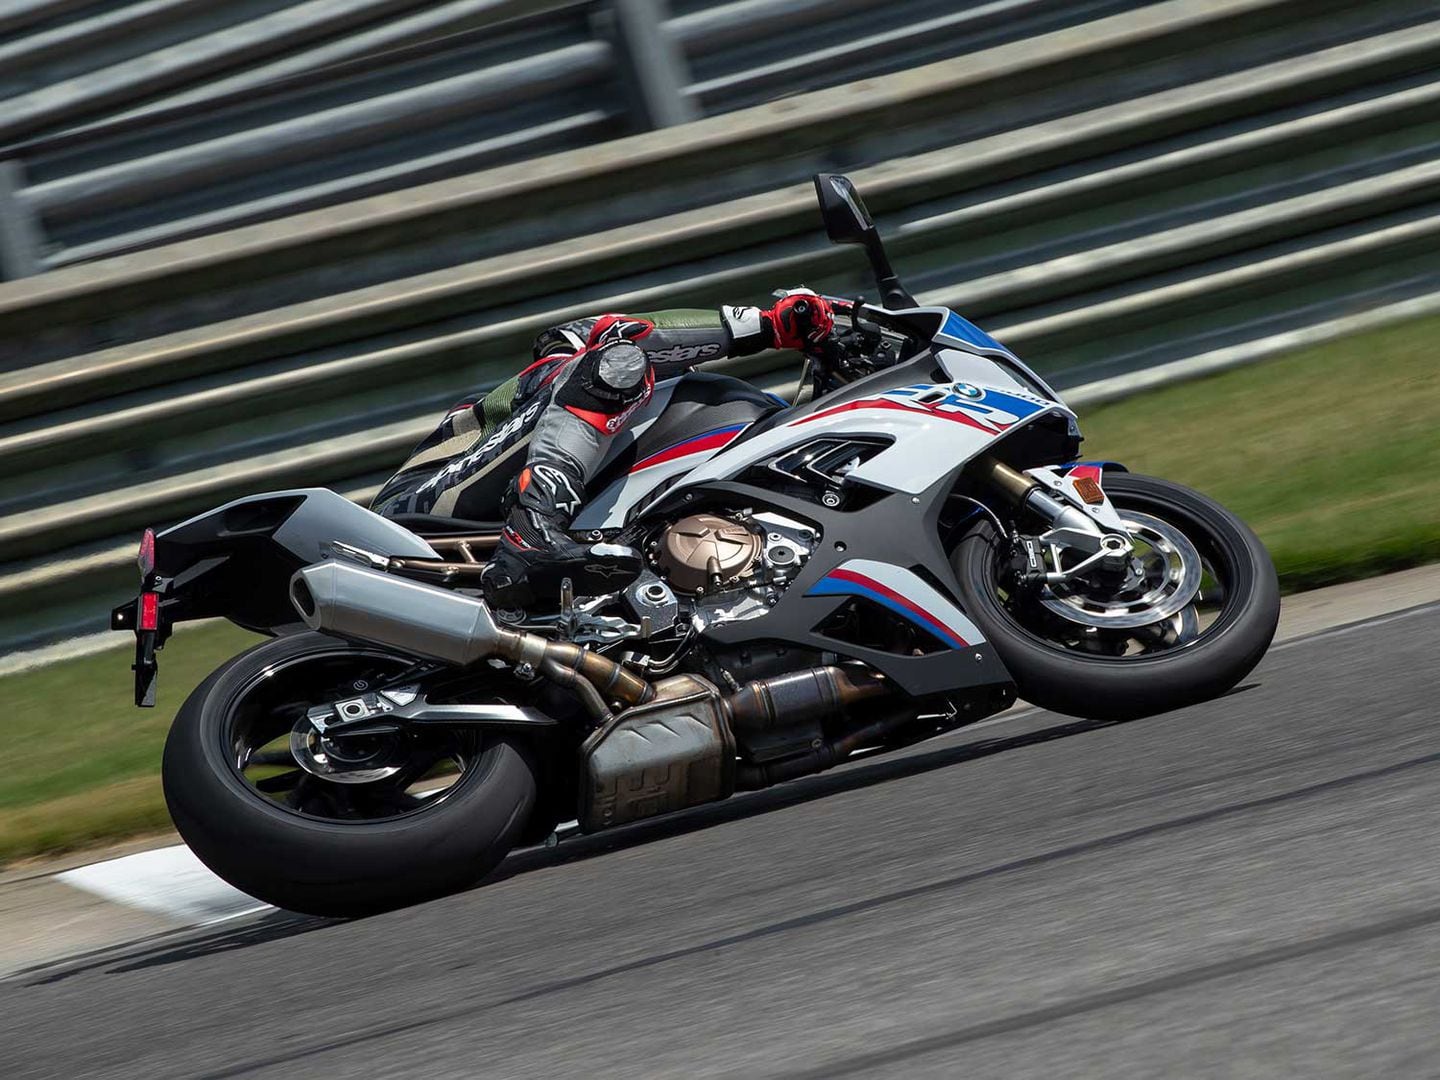 2020 BMW S1000RR Review - First Ride